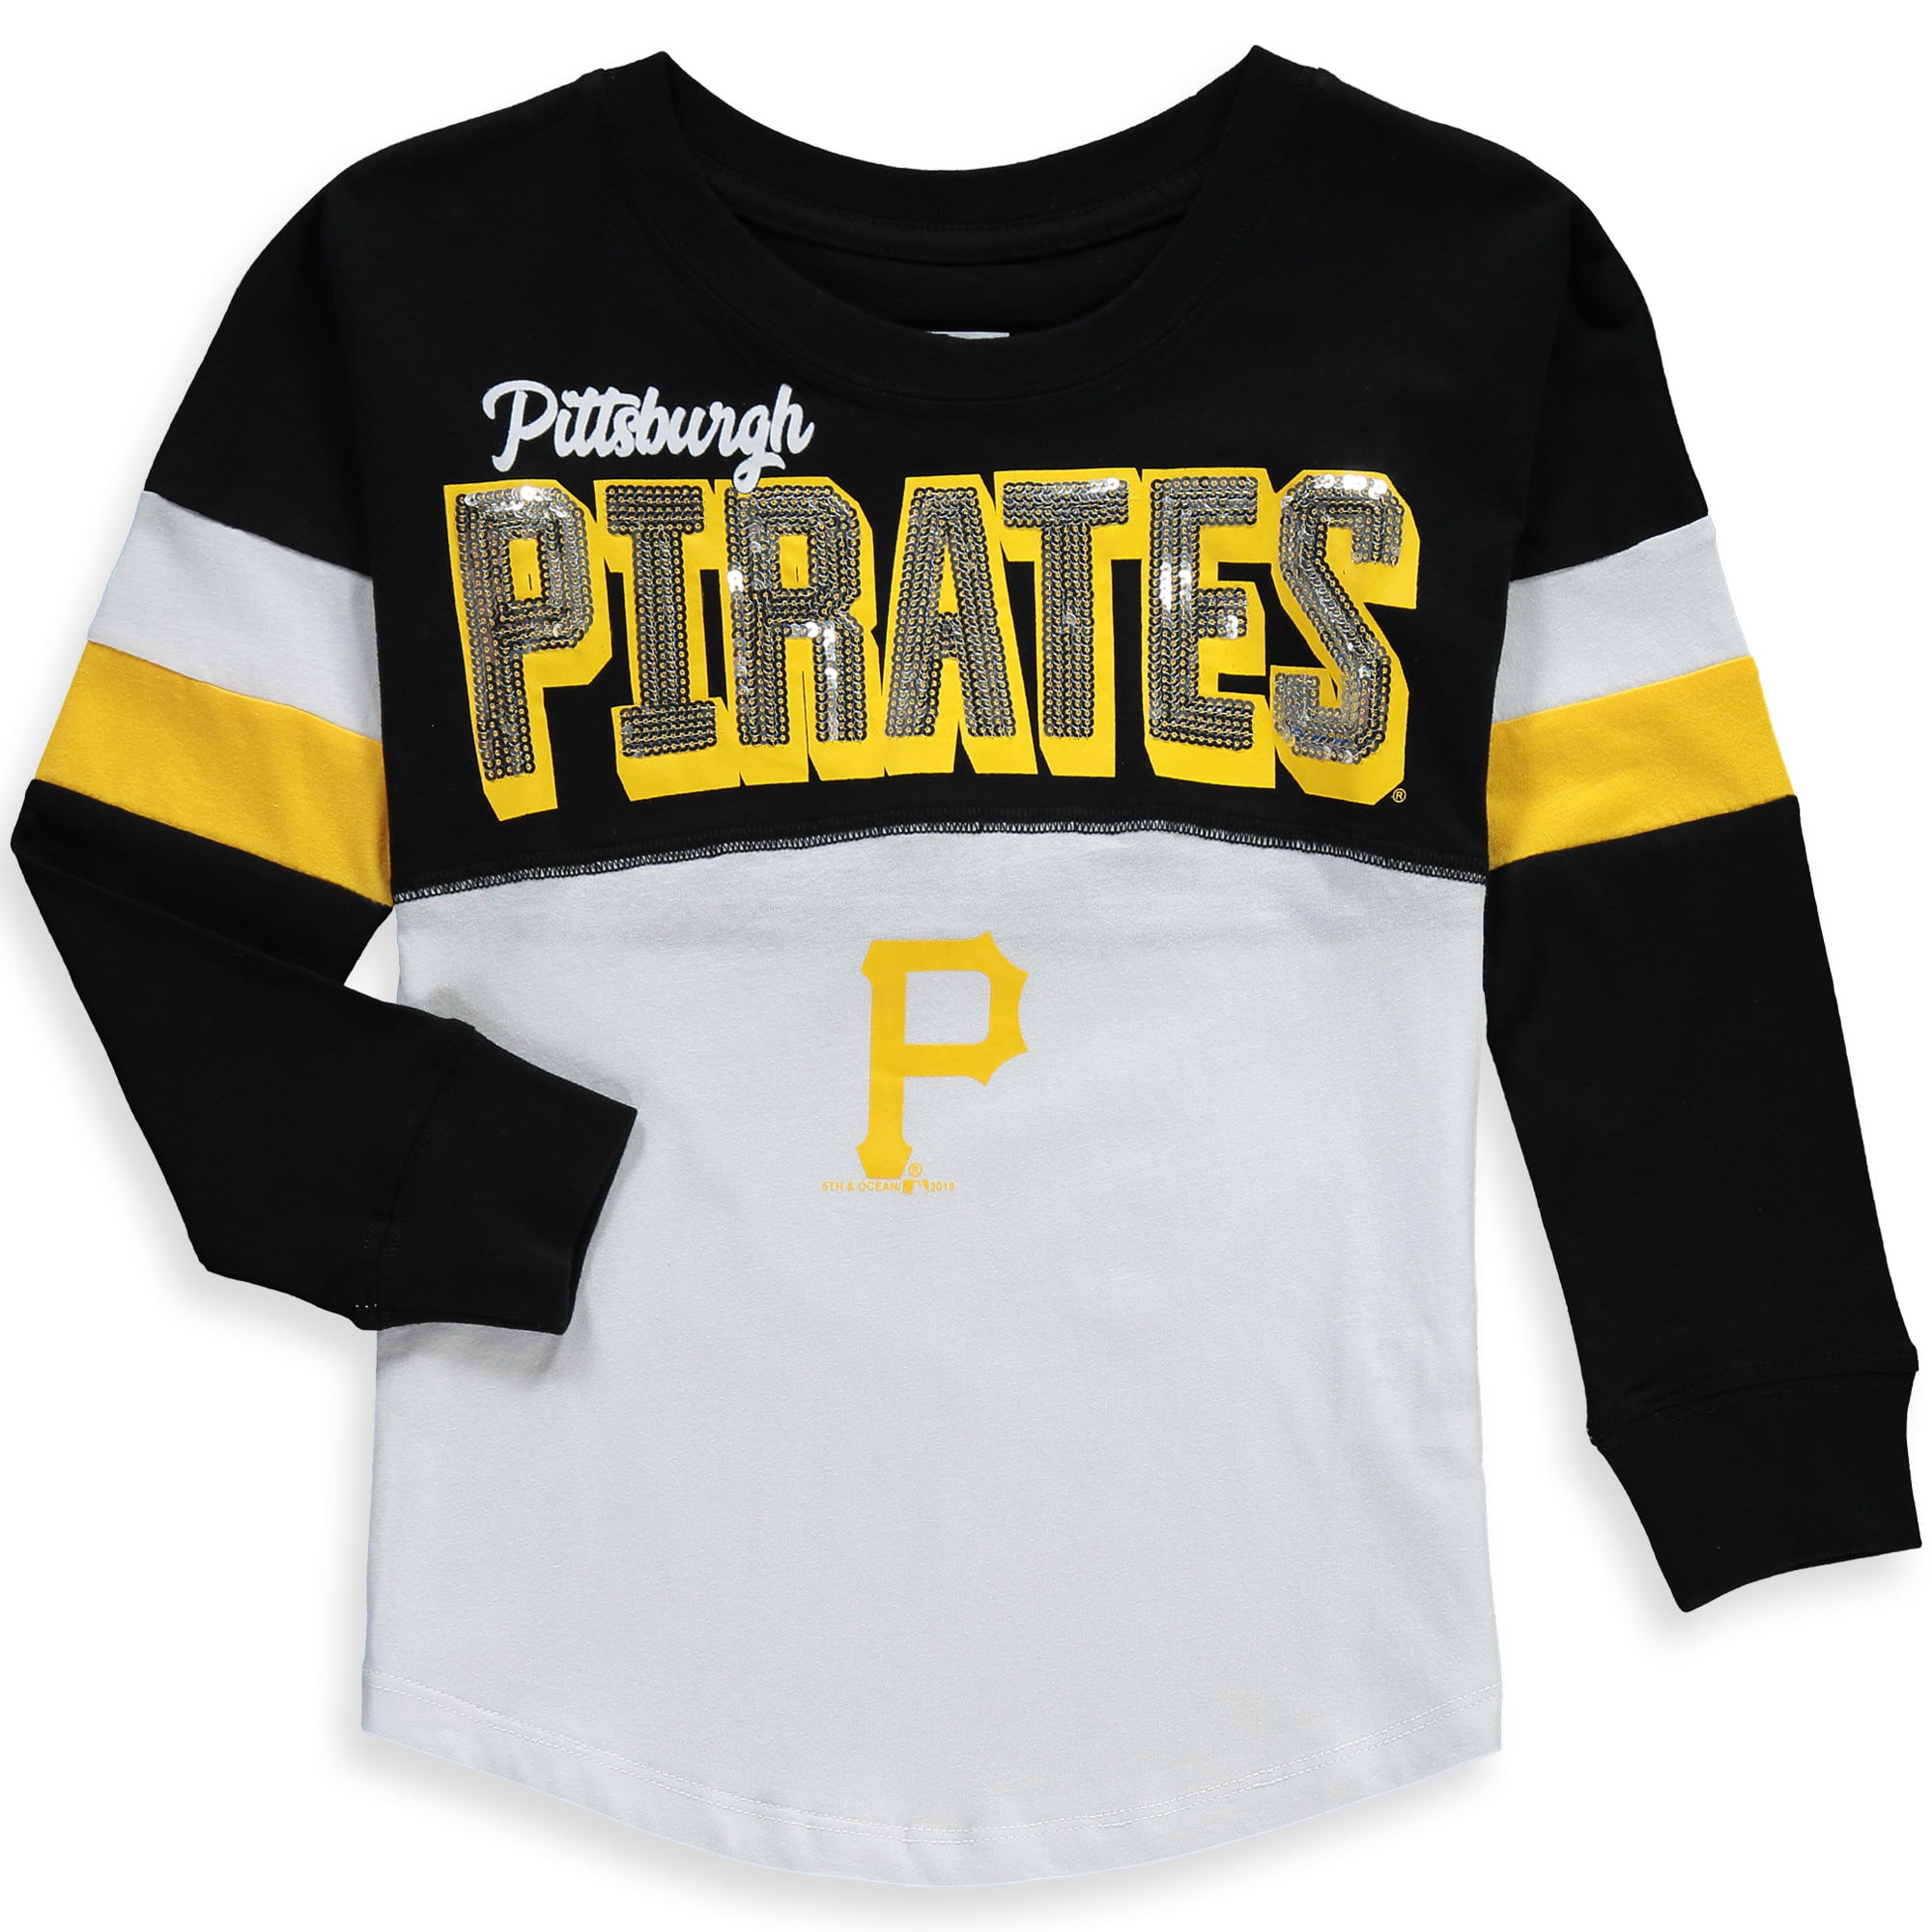 baby pirates jersey